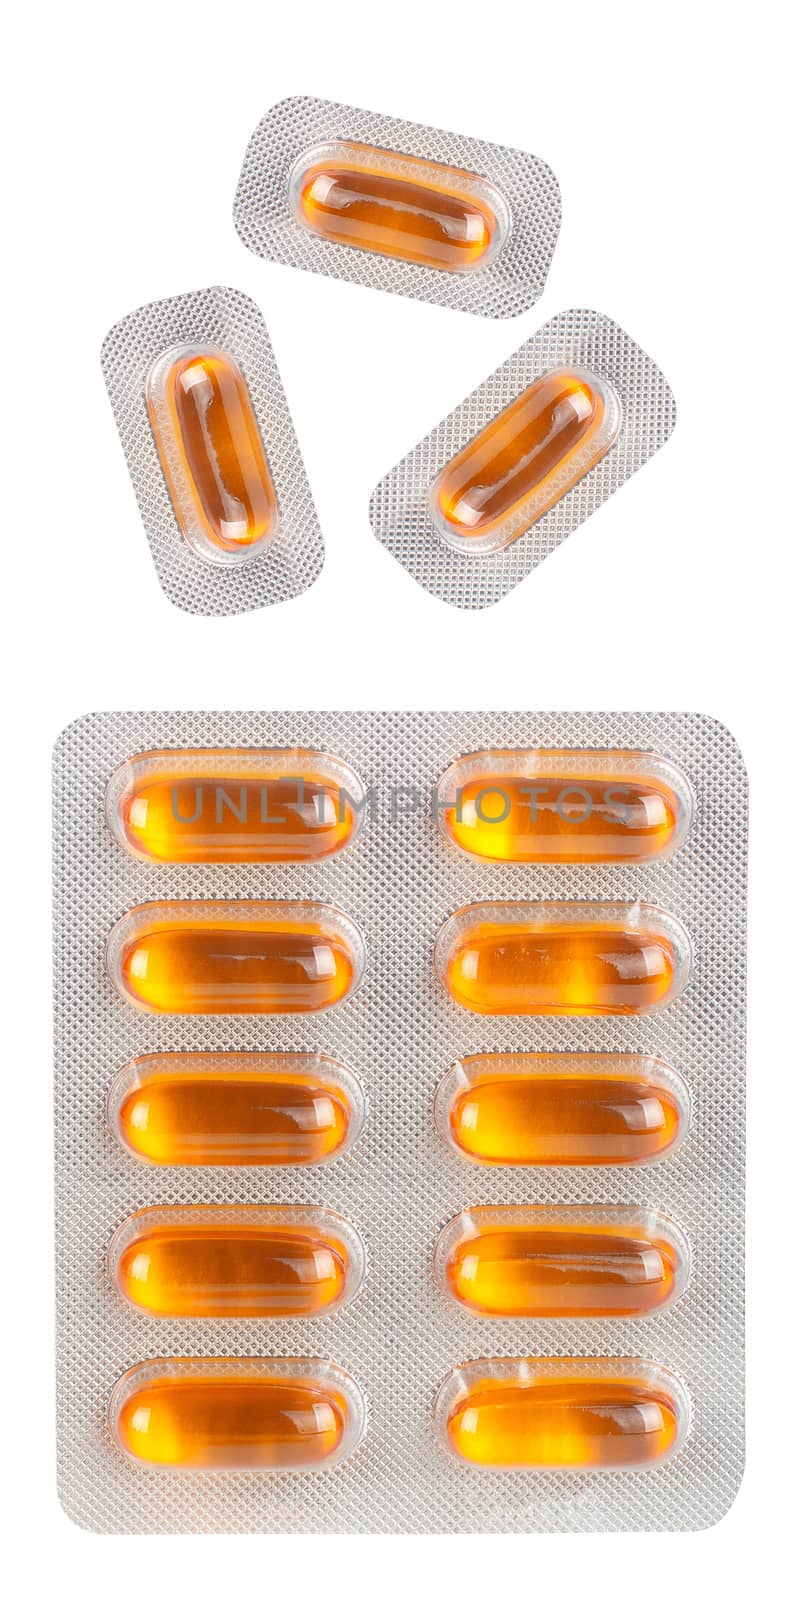 Pills in blister packs as a background